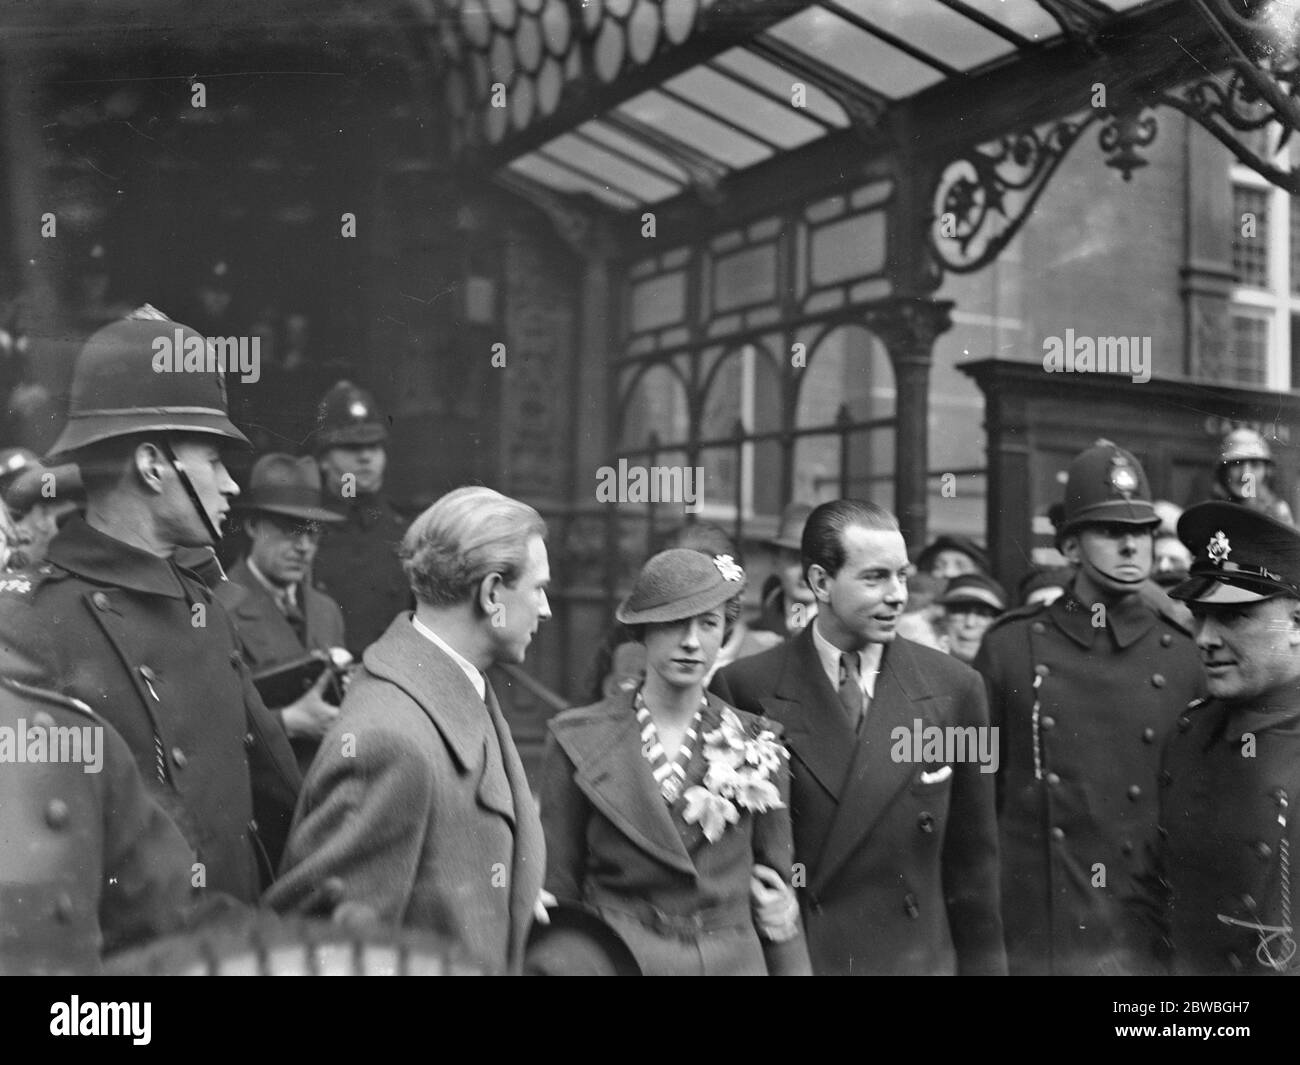 Wedding of Prince Sigvard of Sweden and Fraulein Erika Patzek , Daughter of a Berlin industrialist , at Caxton Hall register office By his marriage the bridegroom forfeited his royal rank and is now known as Mr Bernadotte 8 March 1934 Stock Photo